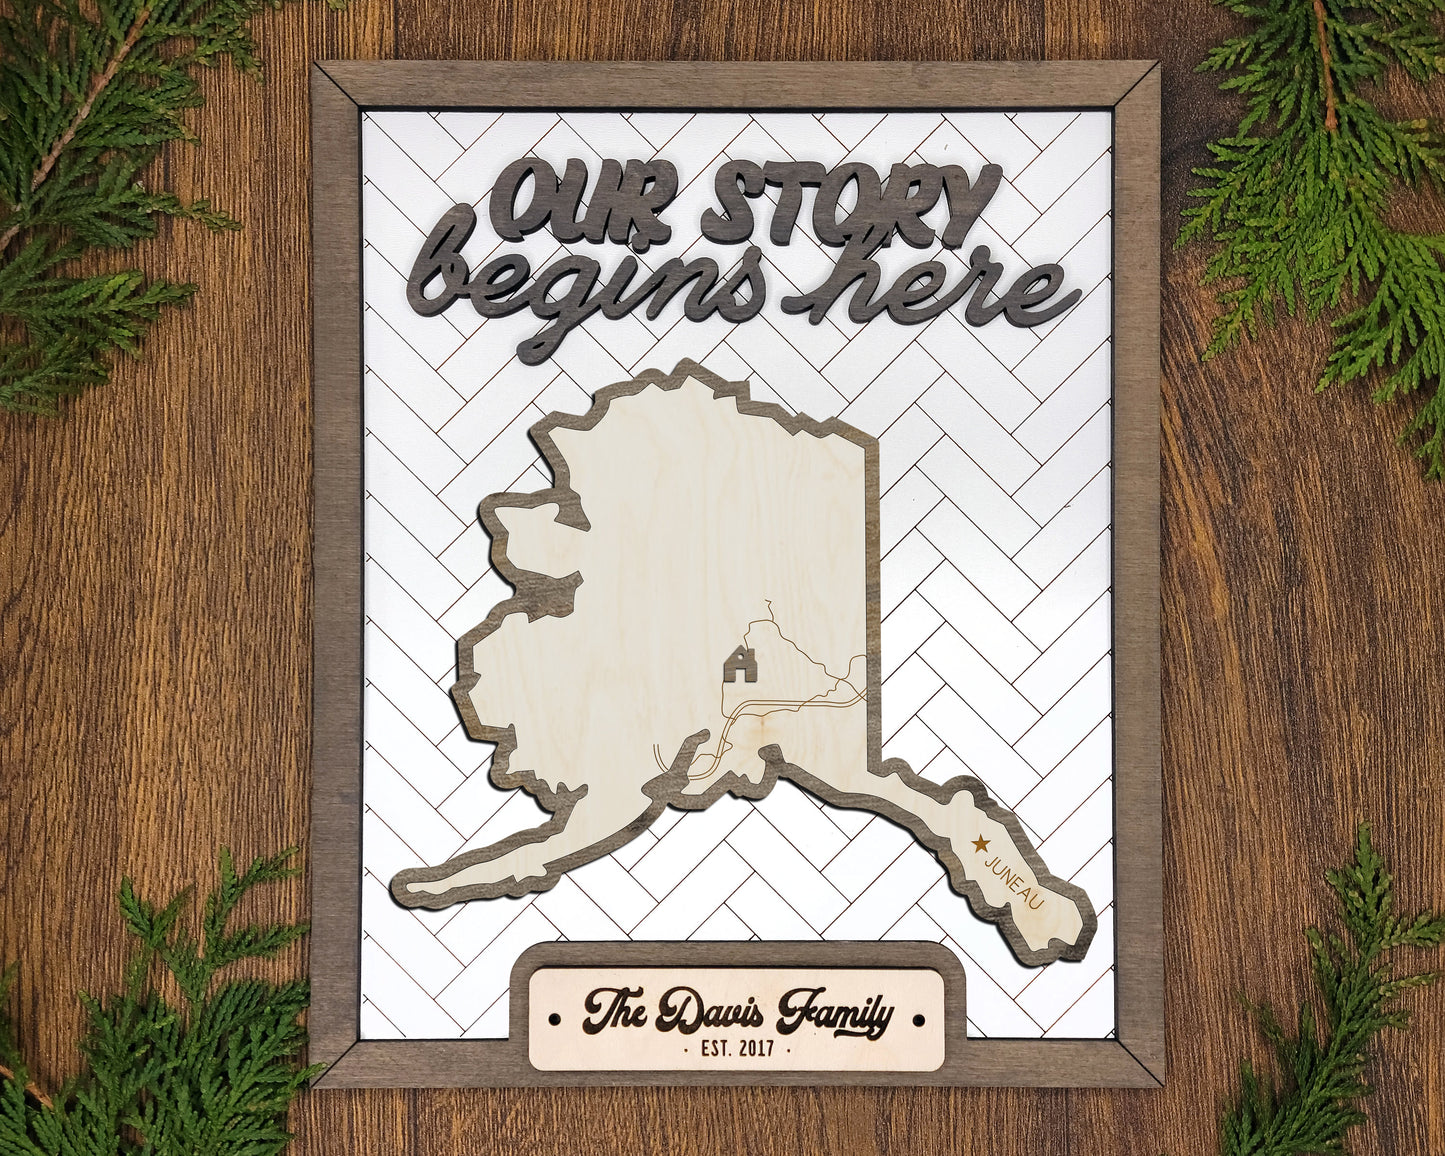 The Alaska State Frame - 13 text options, 12 backgrounds, 25 icons Included - Make over 7,500 designs - Glowforge & Lightburn Tested